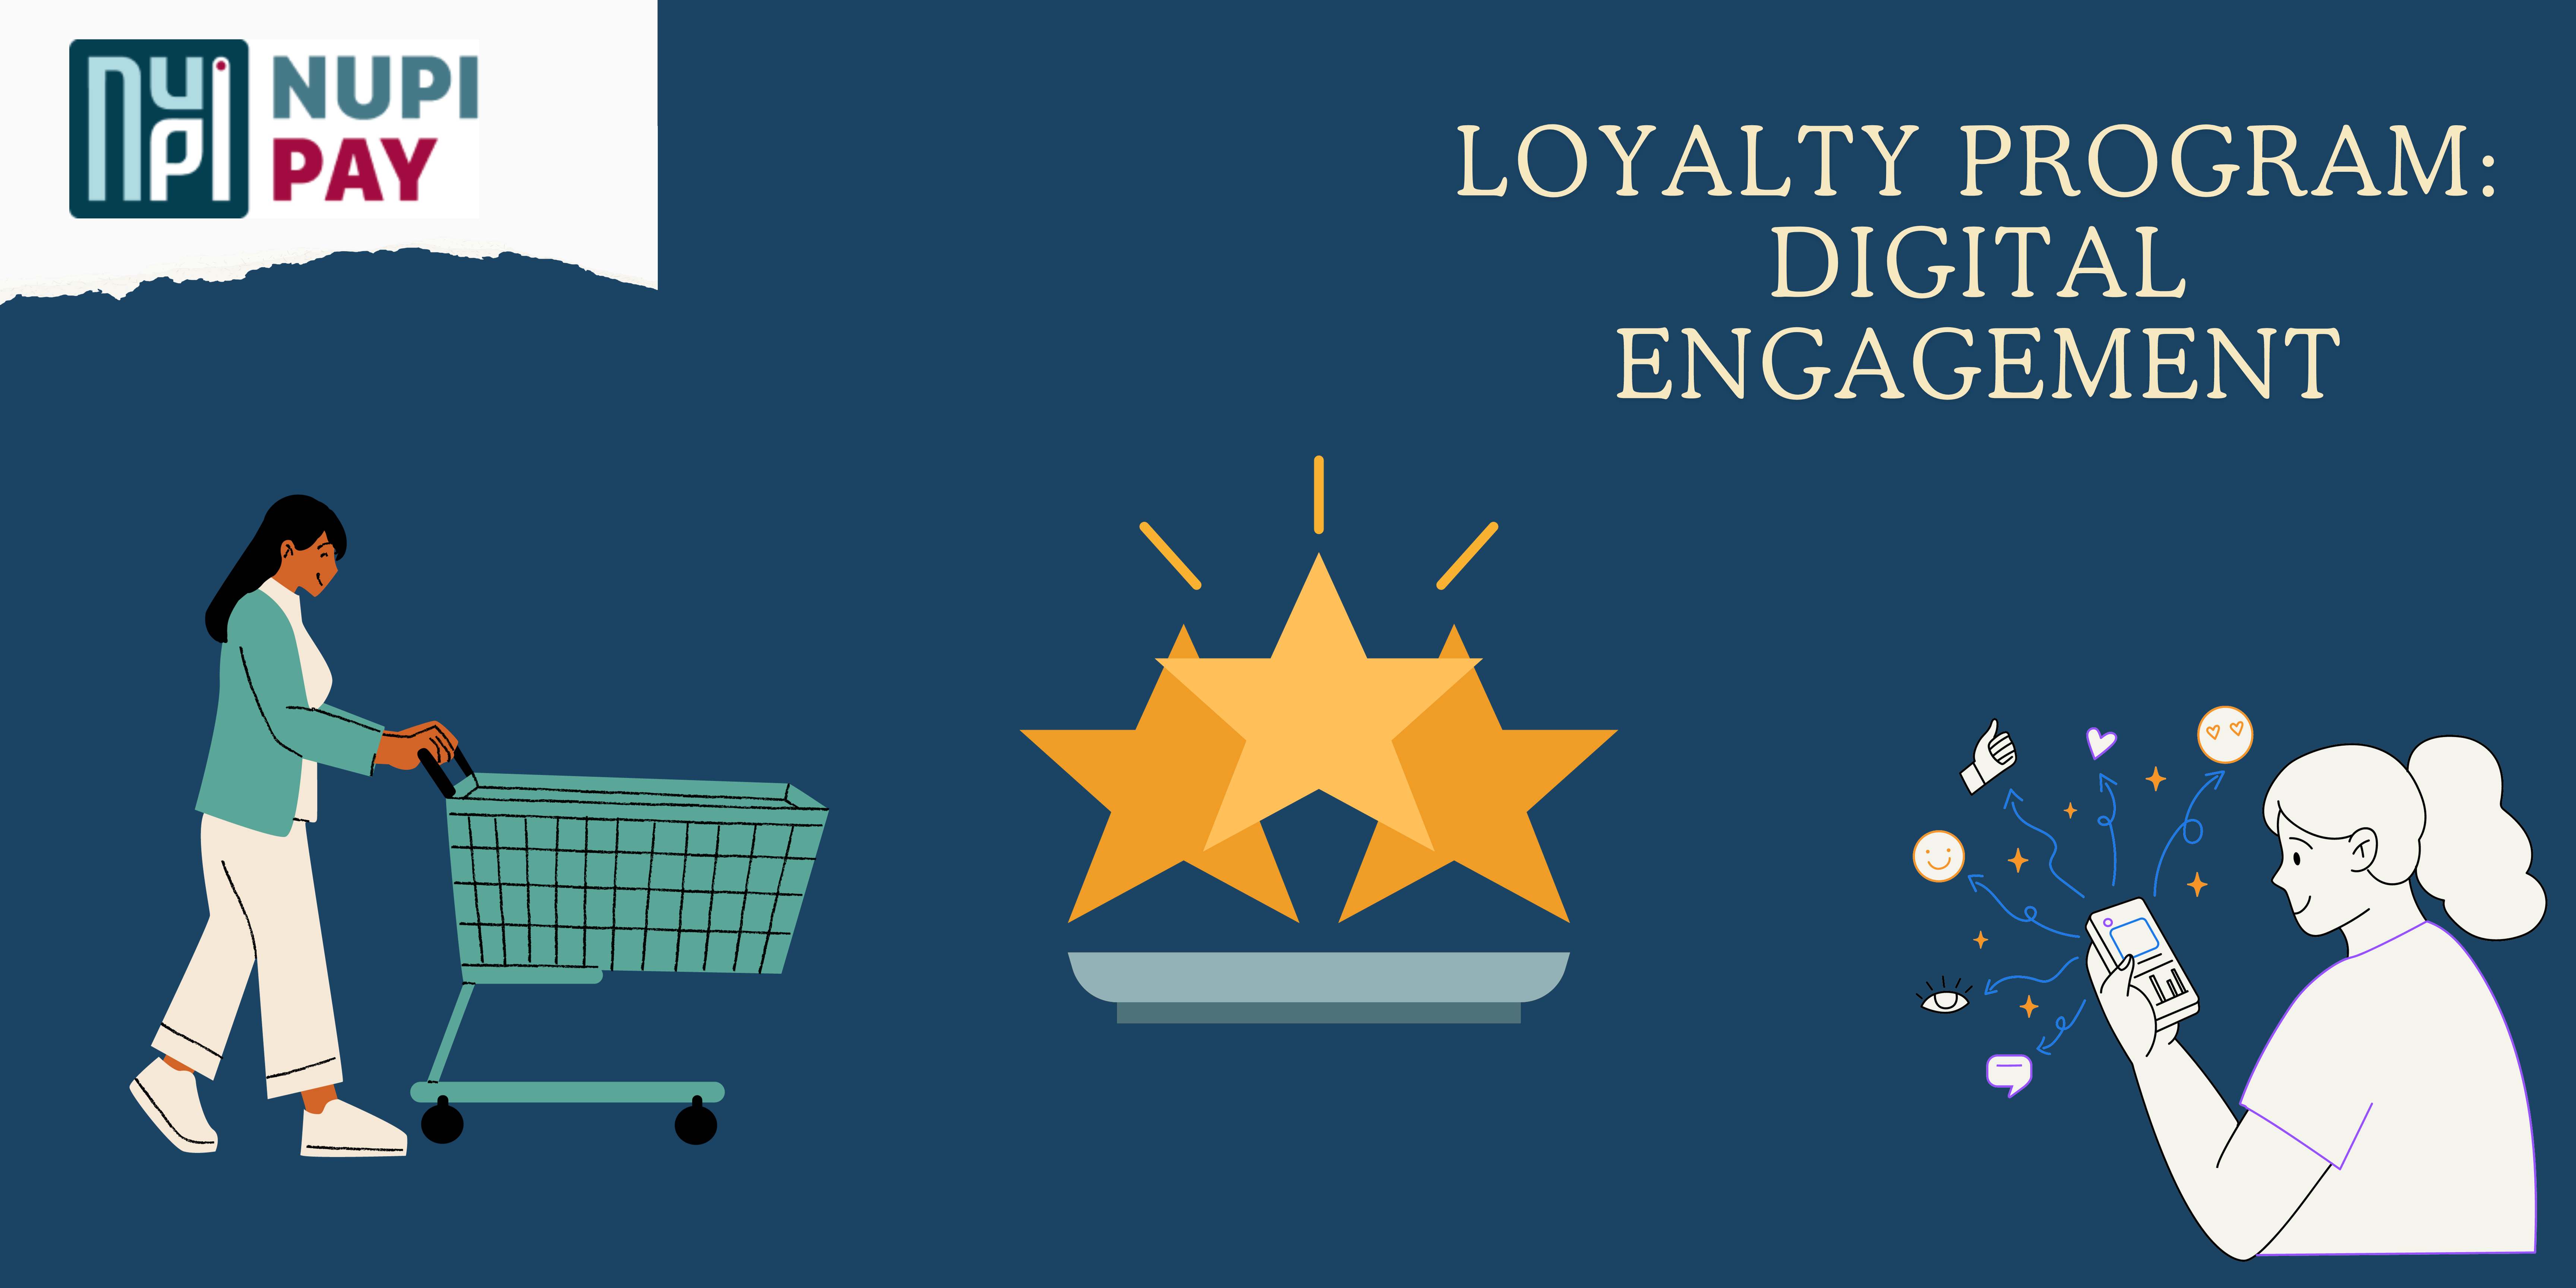 5 Ways Loyalty Programs Can Drive Digital Engagement Significantly